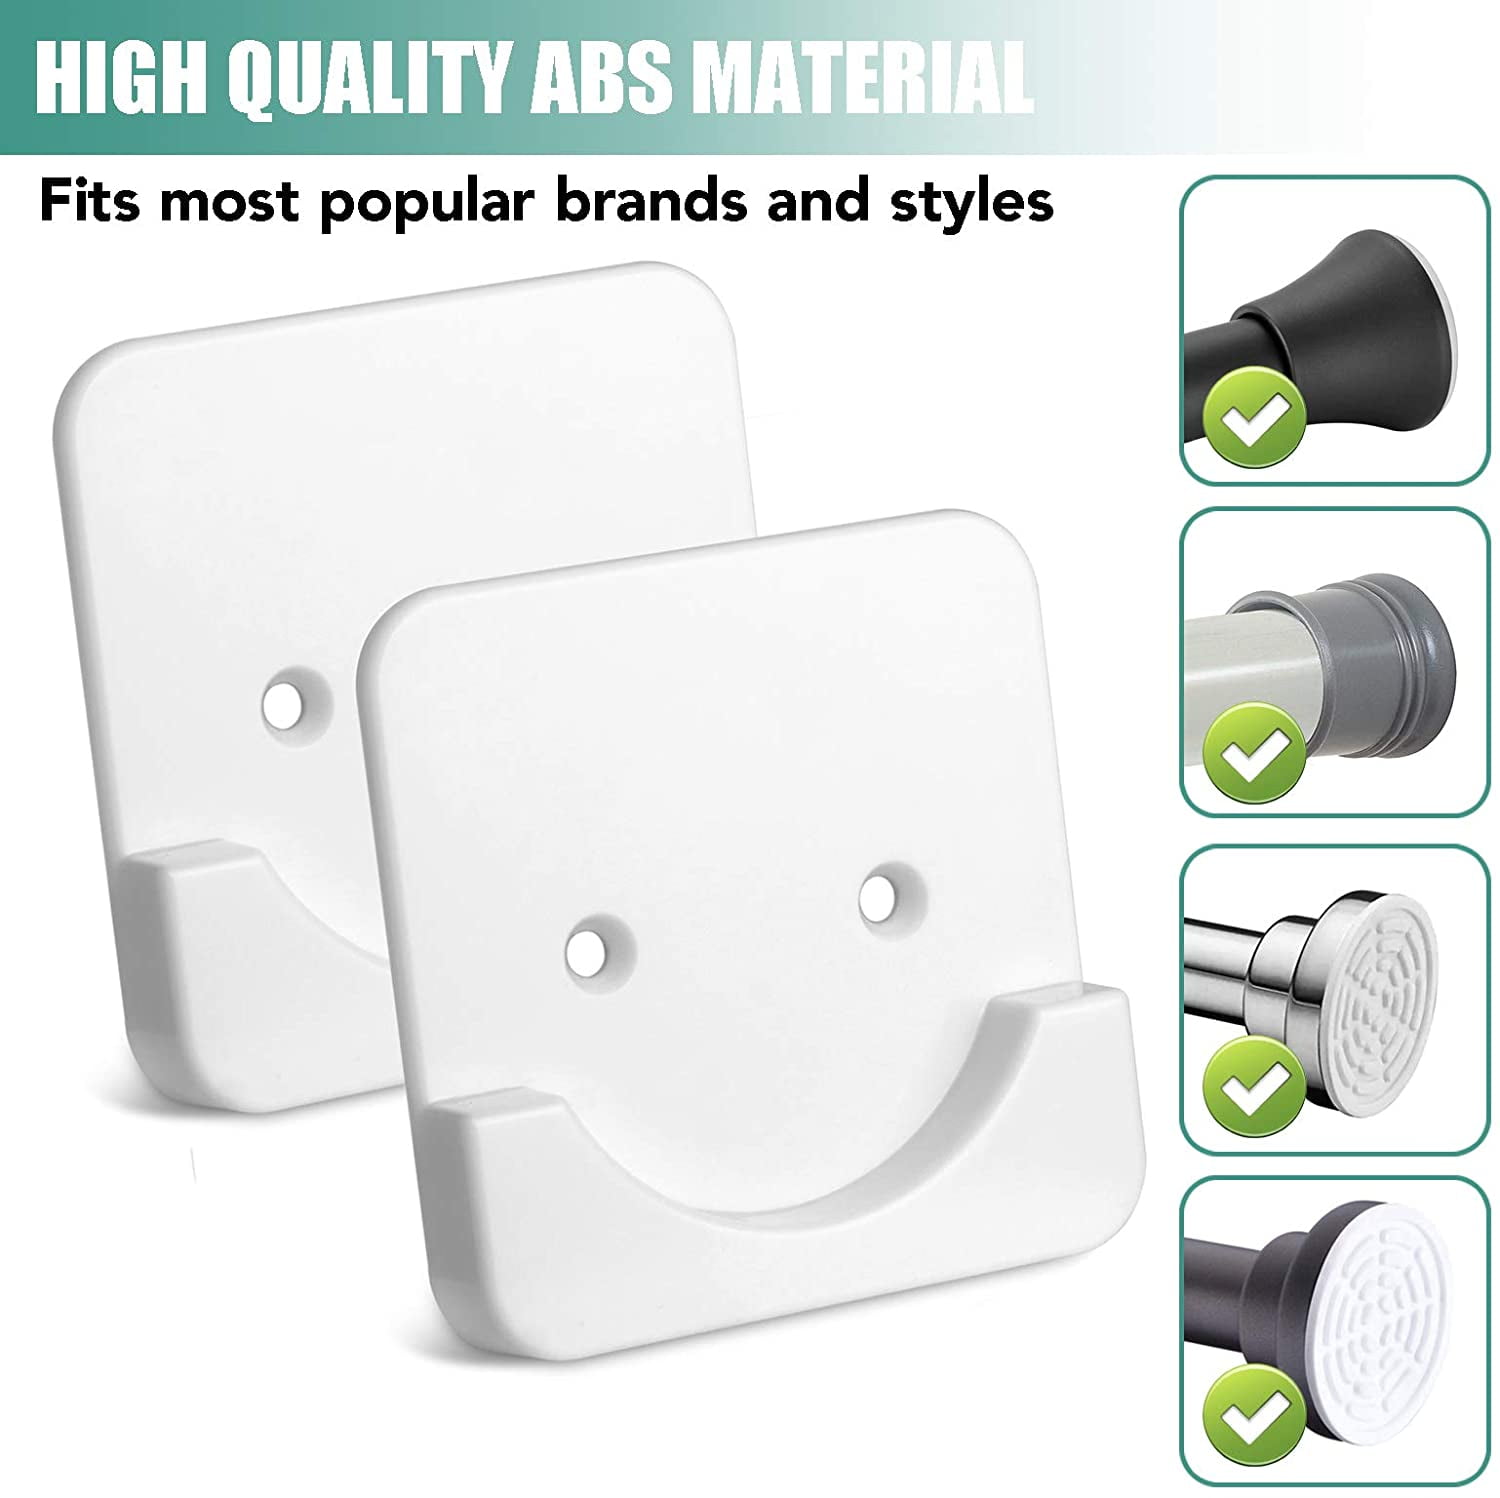 Details about   Shower Rod Holders,Adhesive Bathroom Socket for Curtain,2 Pcs Rod Not Included 